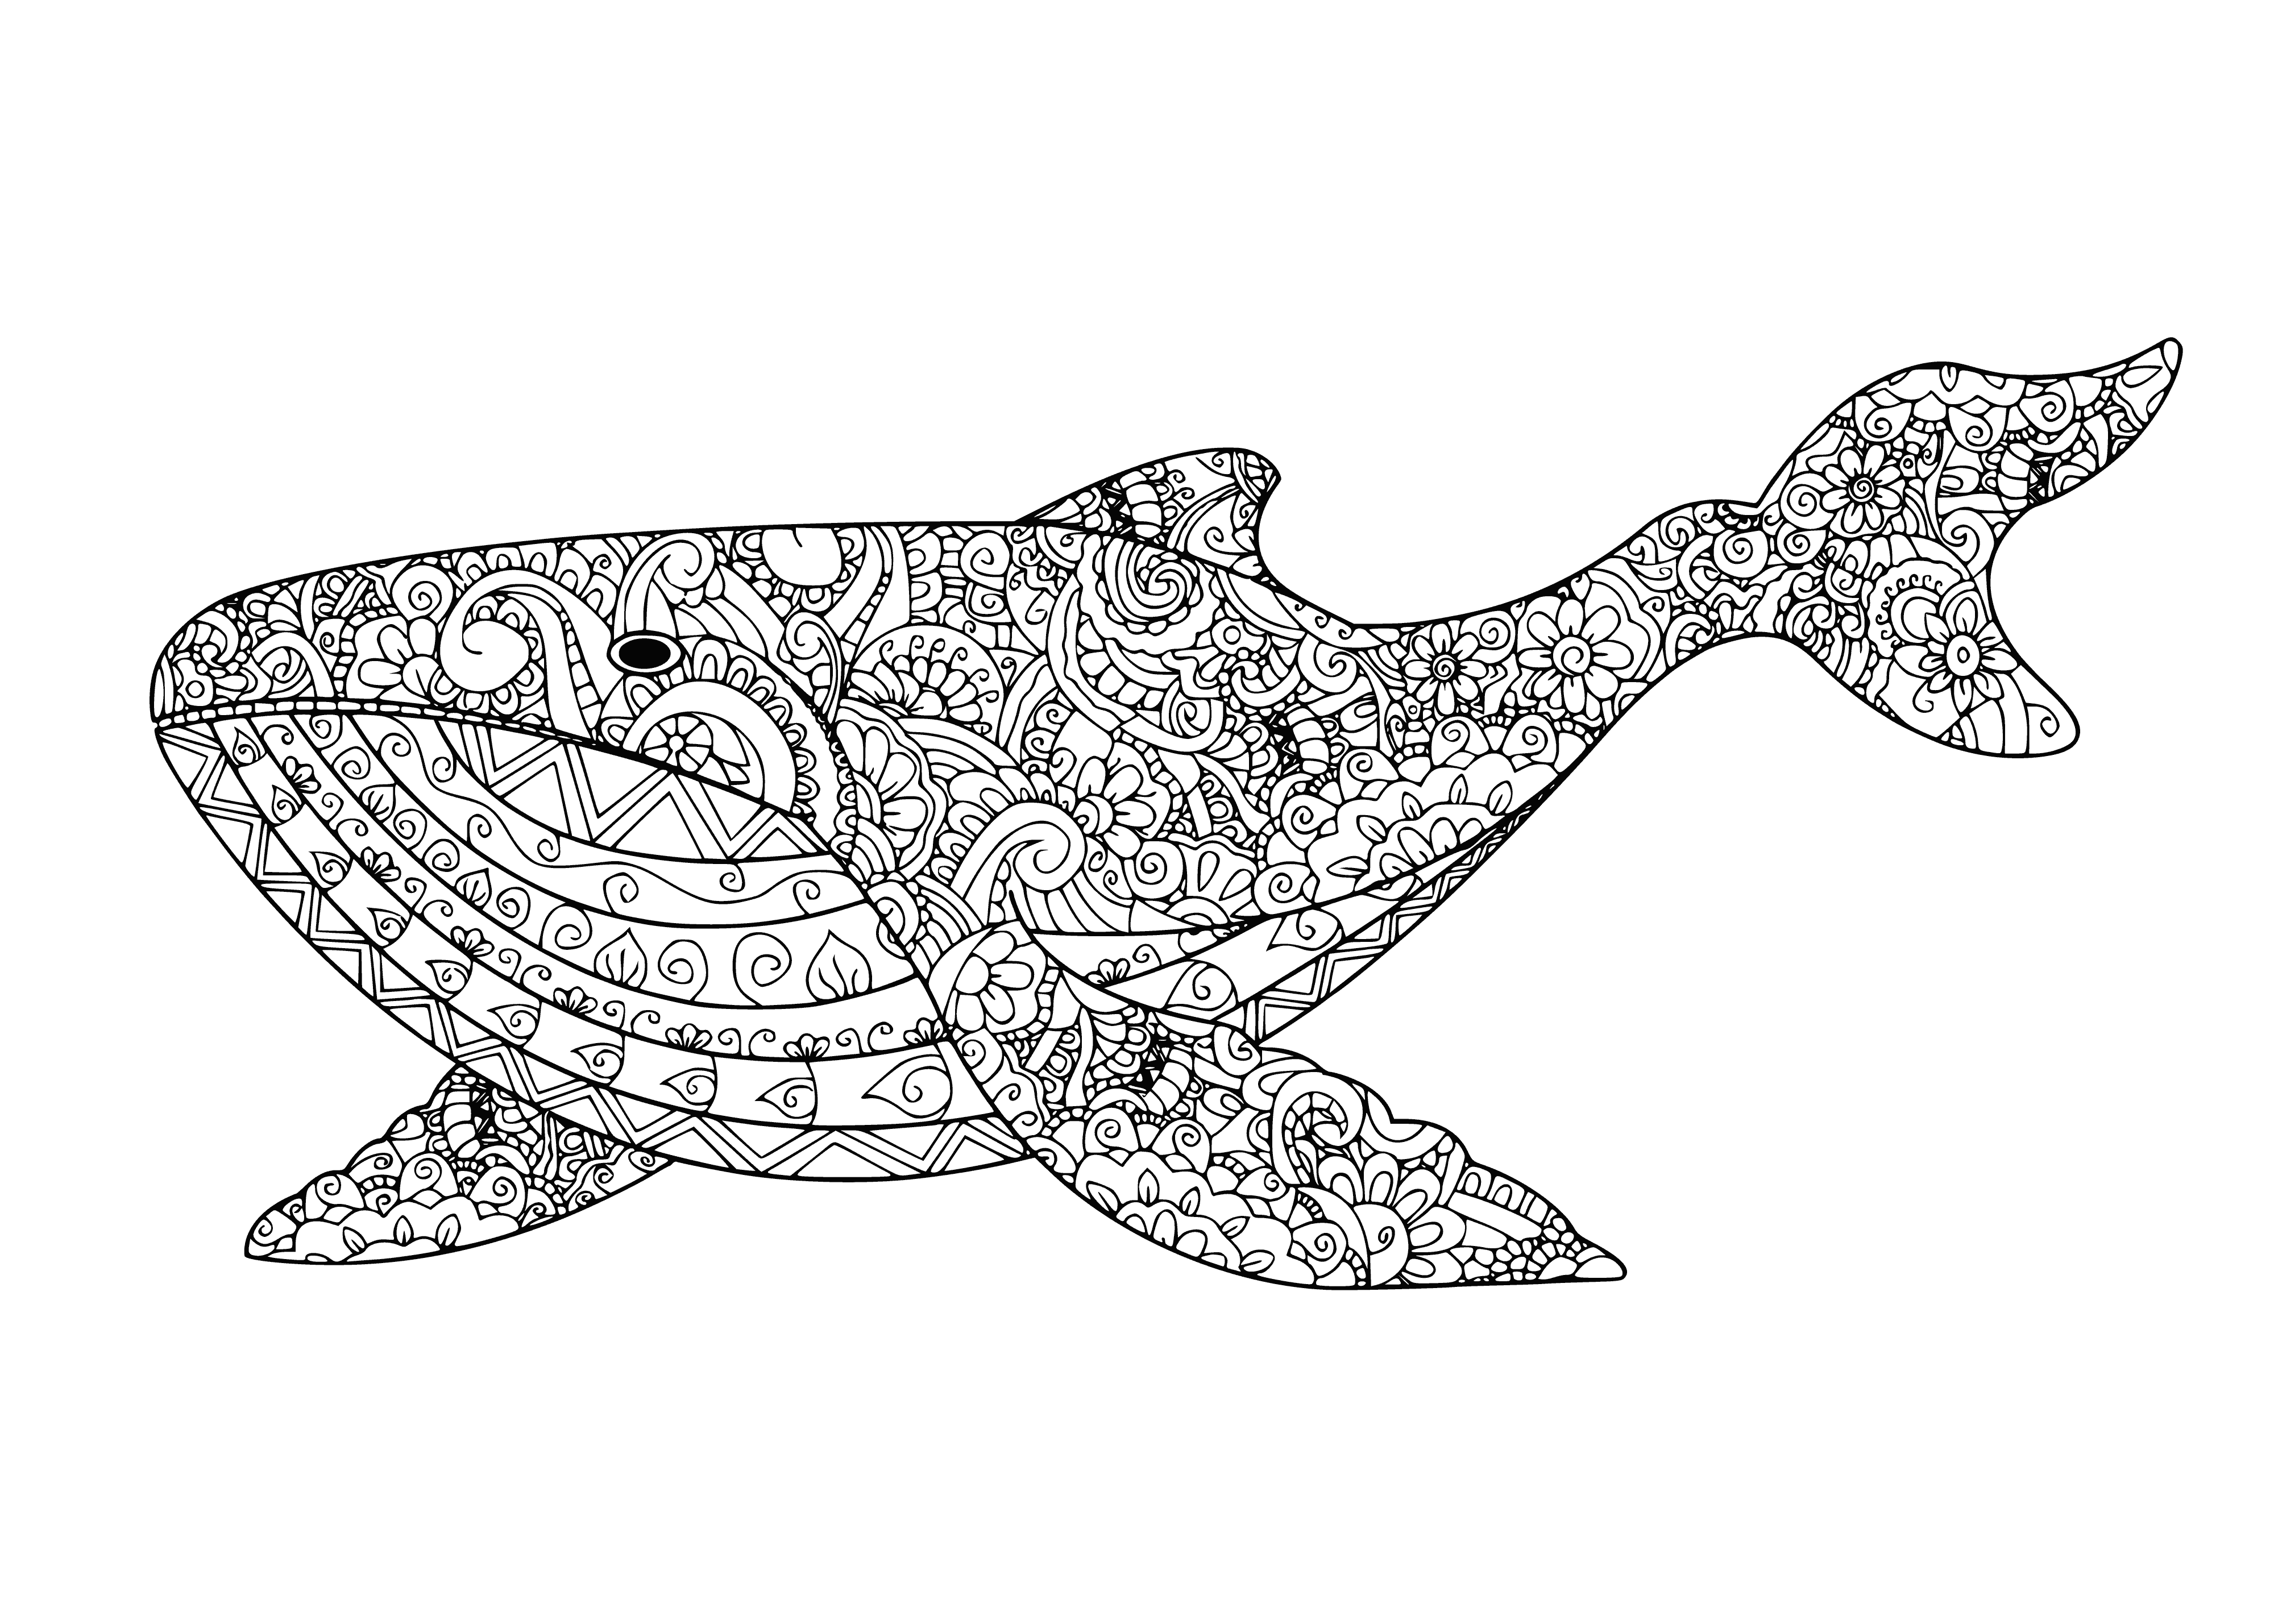 coloring page: Coloring kit with pages of sea creatures, sun, and waves to reduce stress and bring joy.